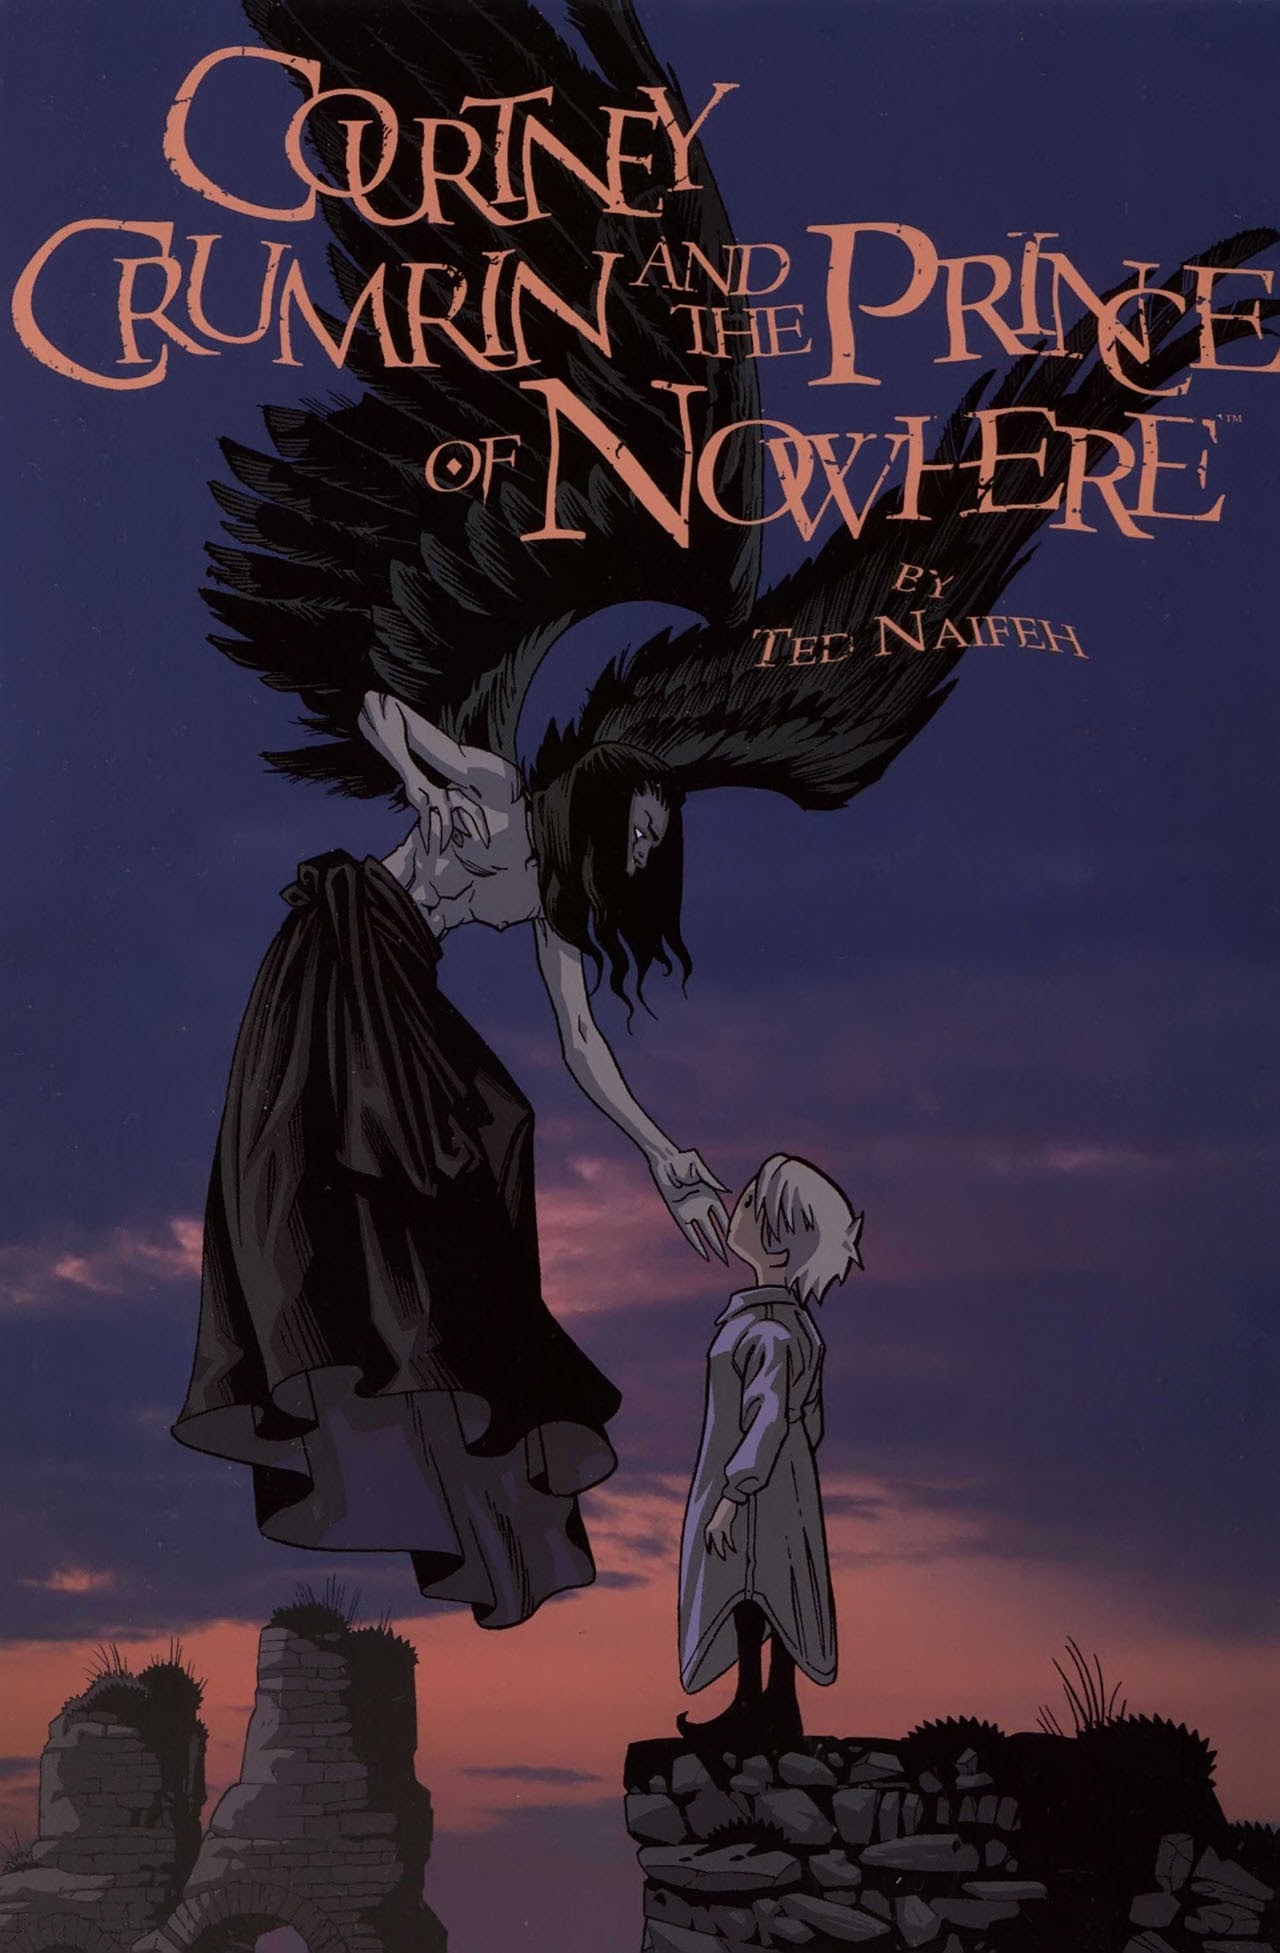 Read online Courtney Crumrin and the Prince of Nowhere comic -  Issue # Full - 1